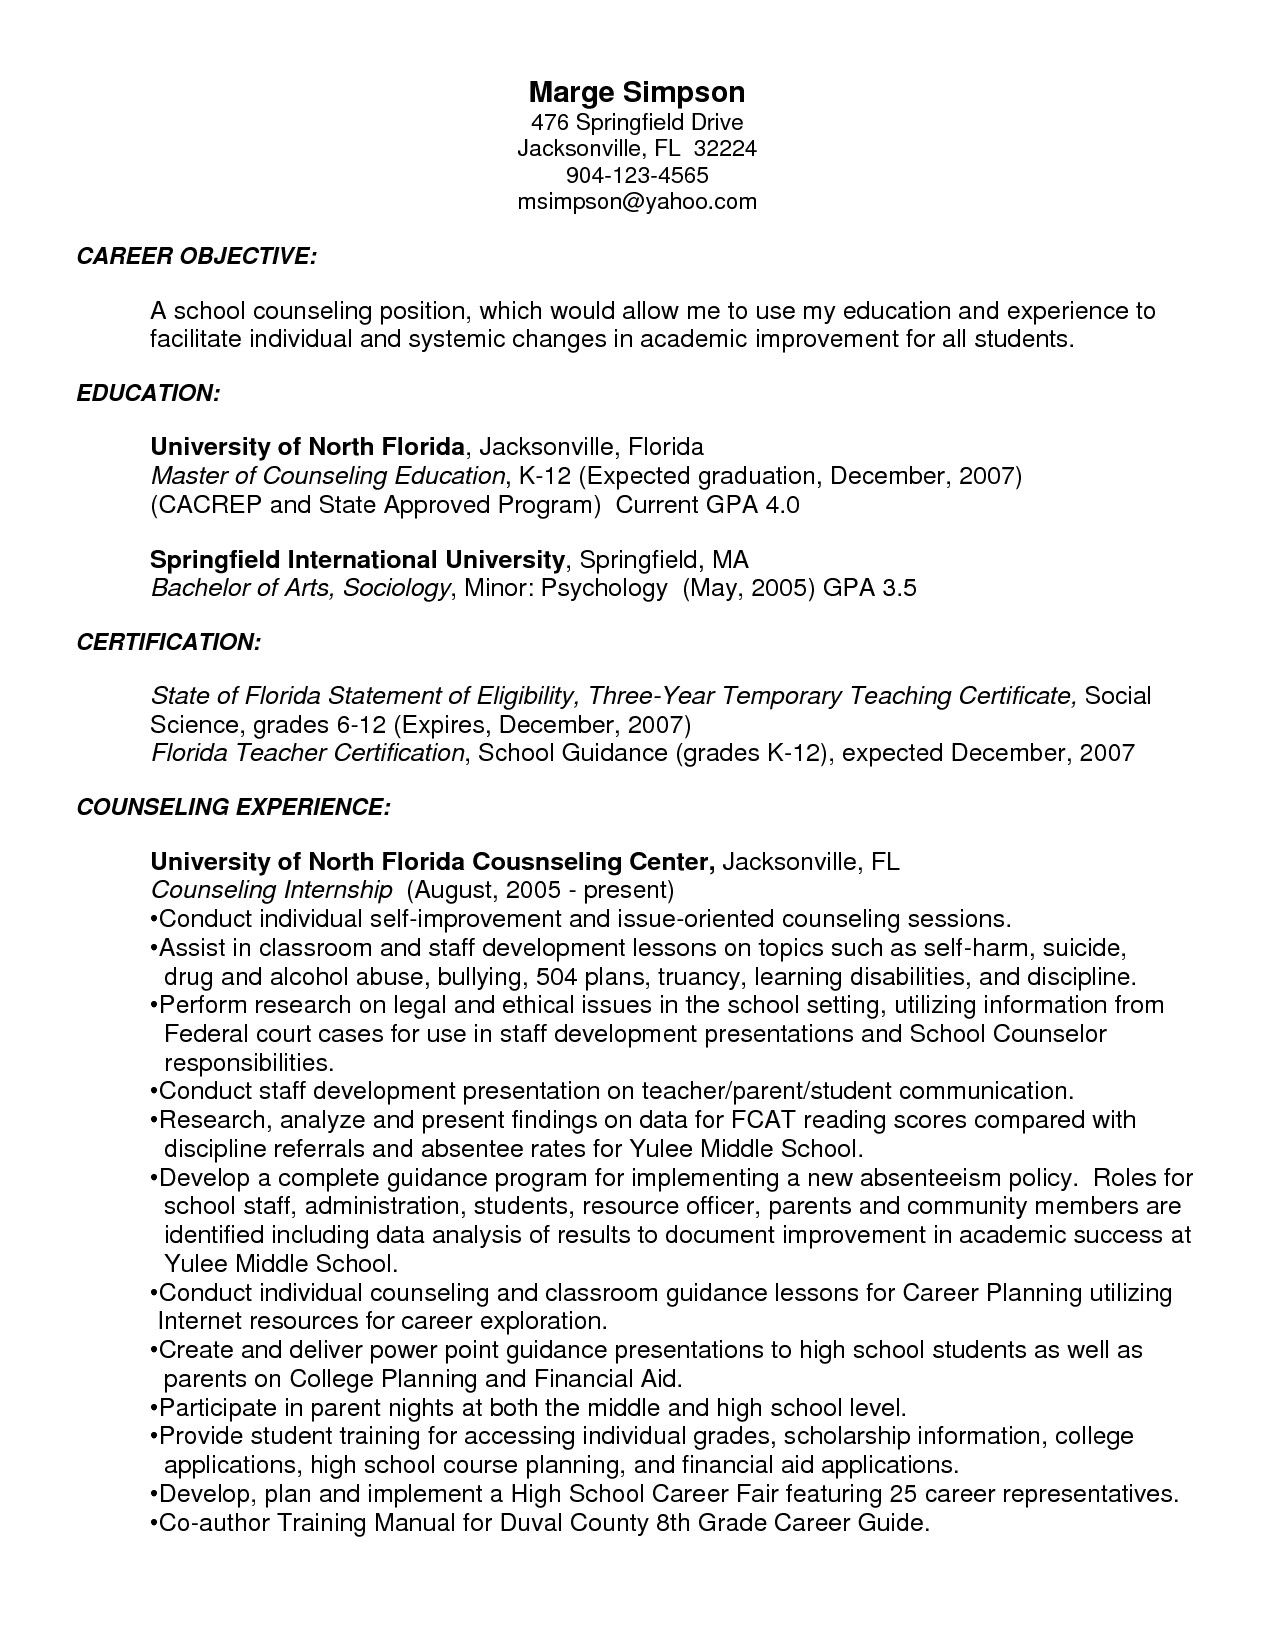 Small Business Owner Resume Small Business Owner Resume Job Description